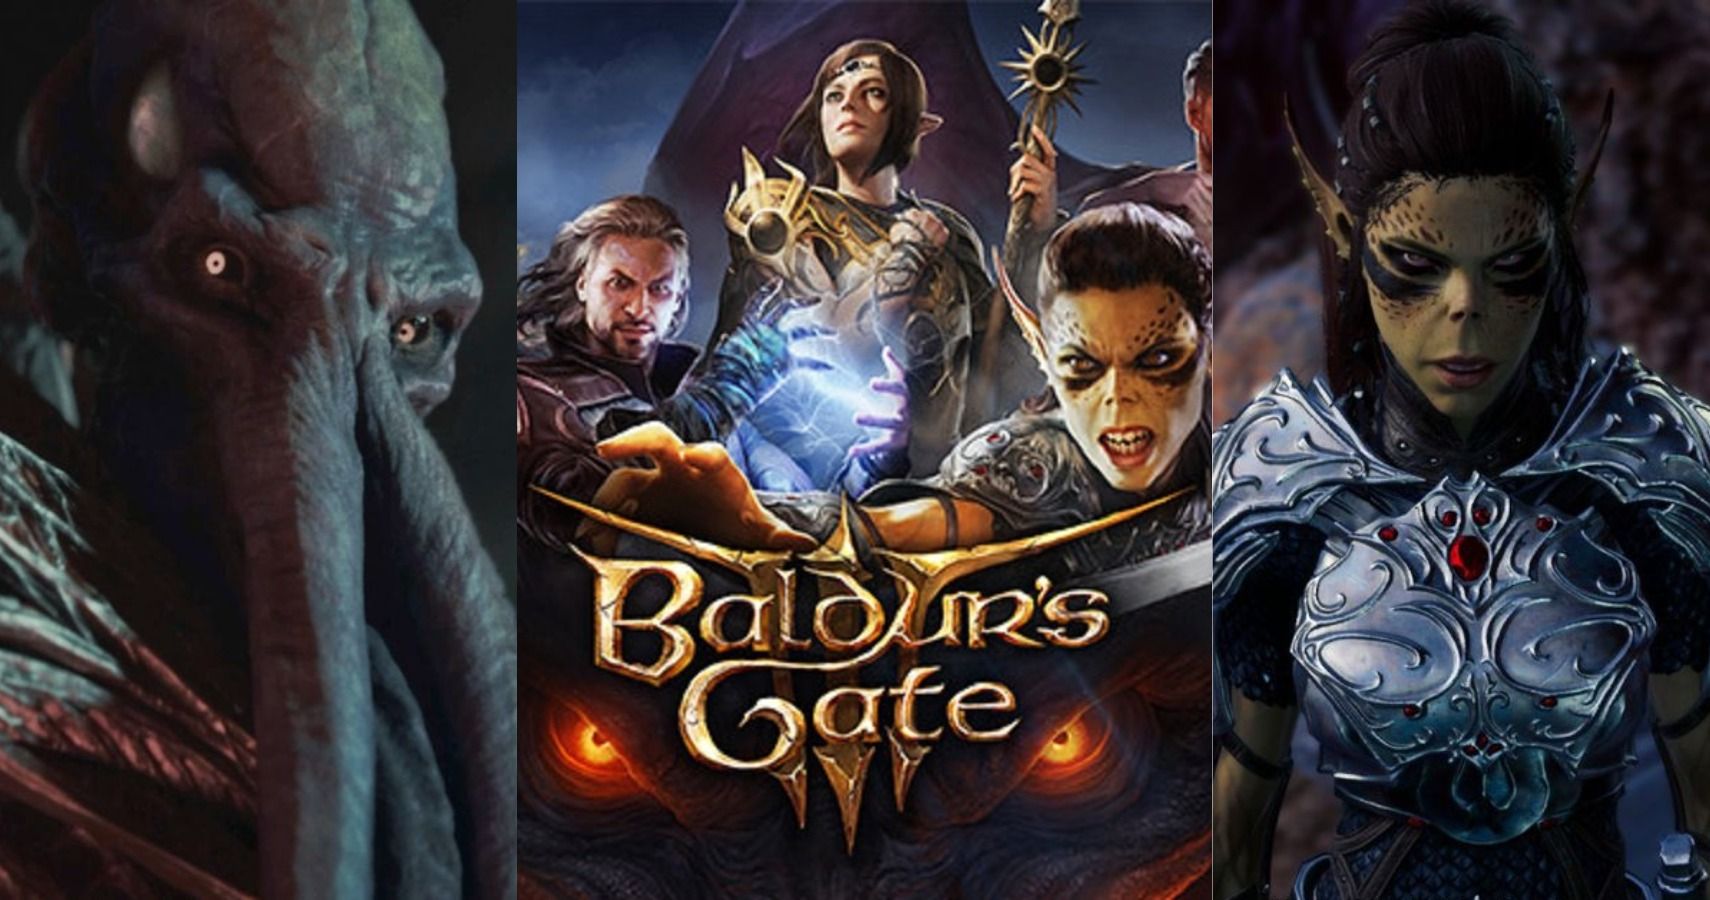 3 piece image. Mind Flayer on the left, poster of Balder's Gate 3 in the middle, Main character on the right